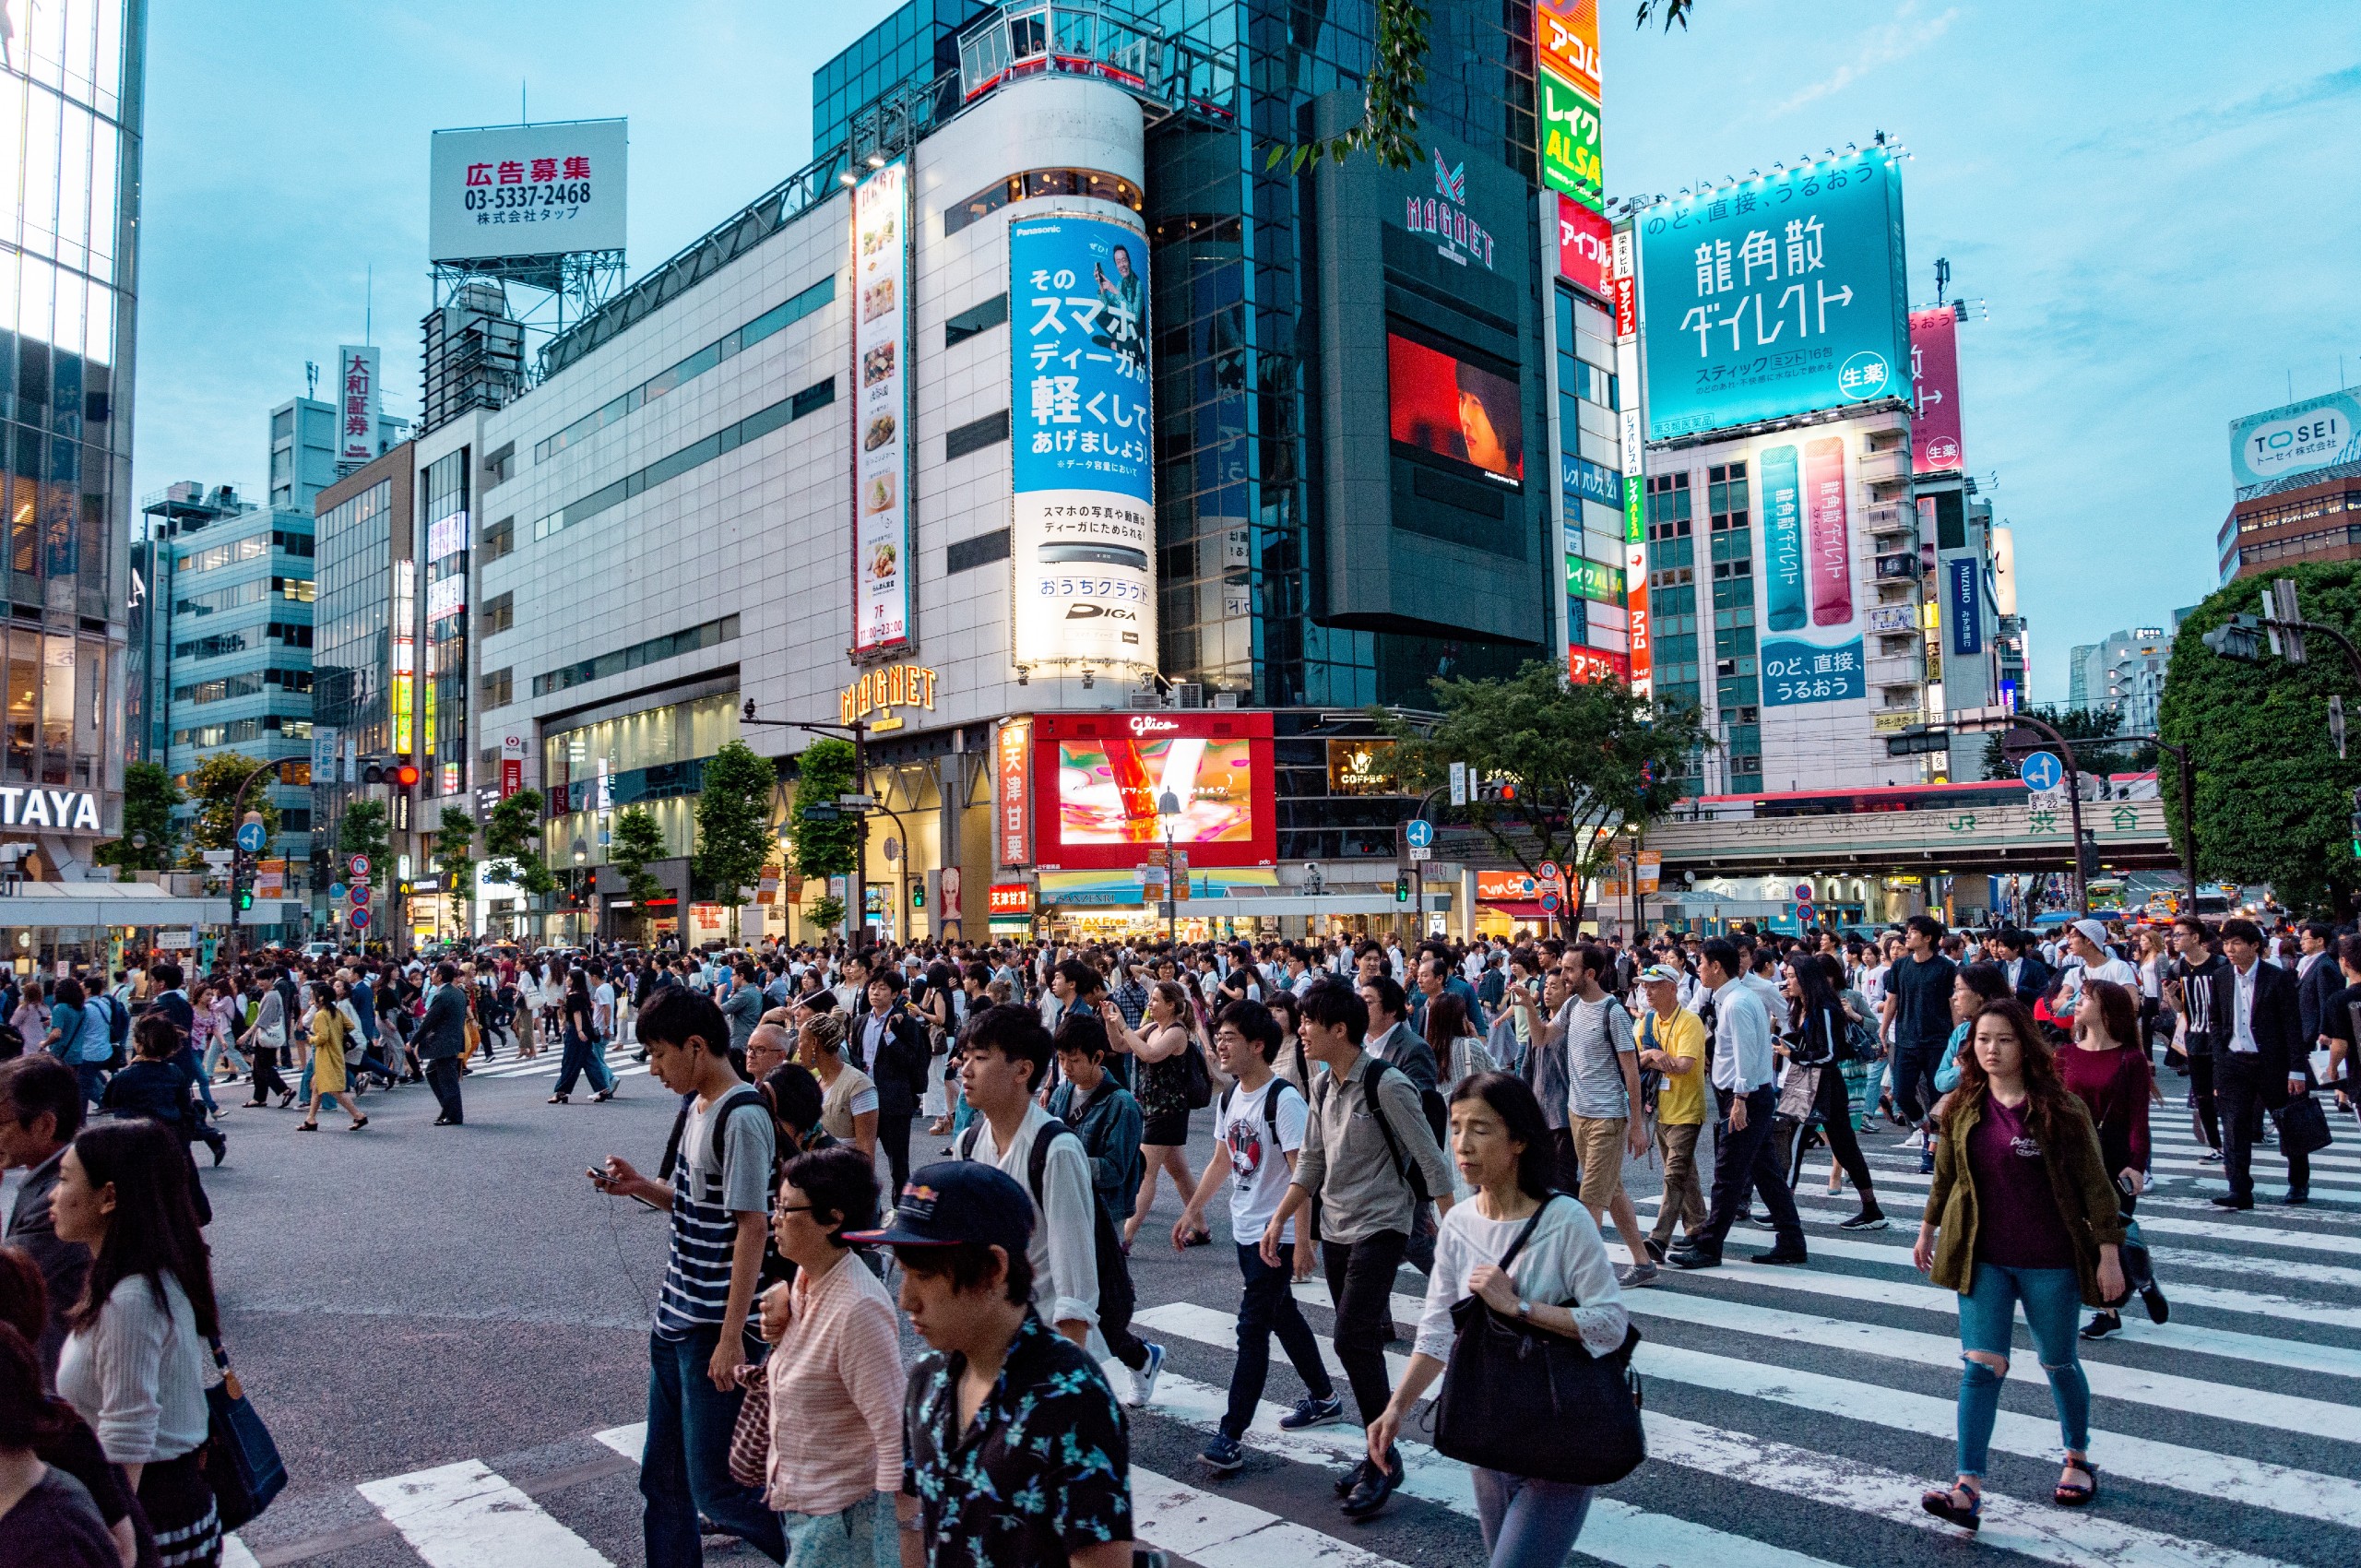 Busy crossroad in Tokyo